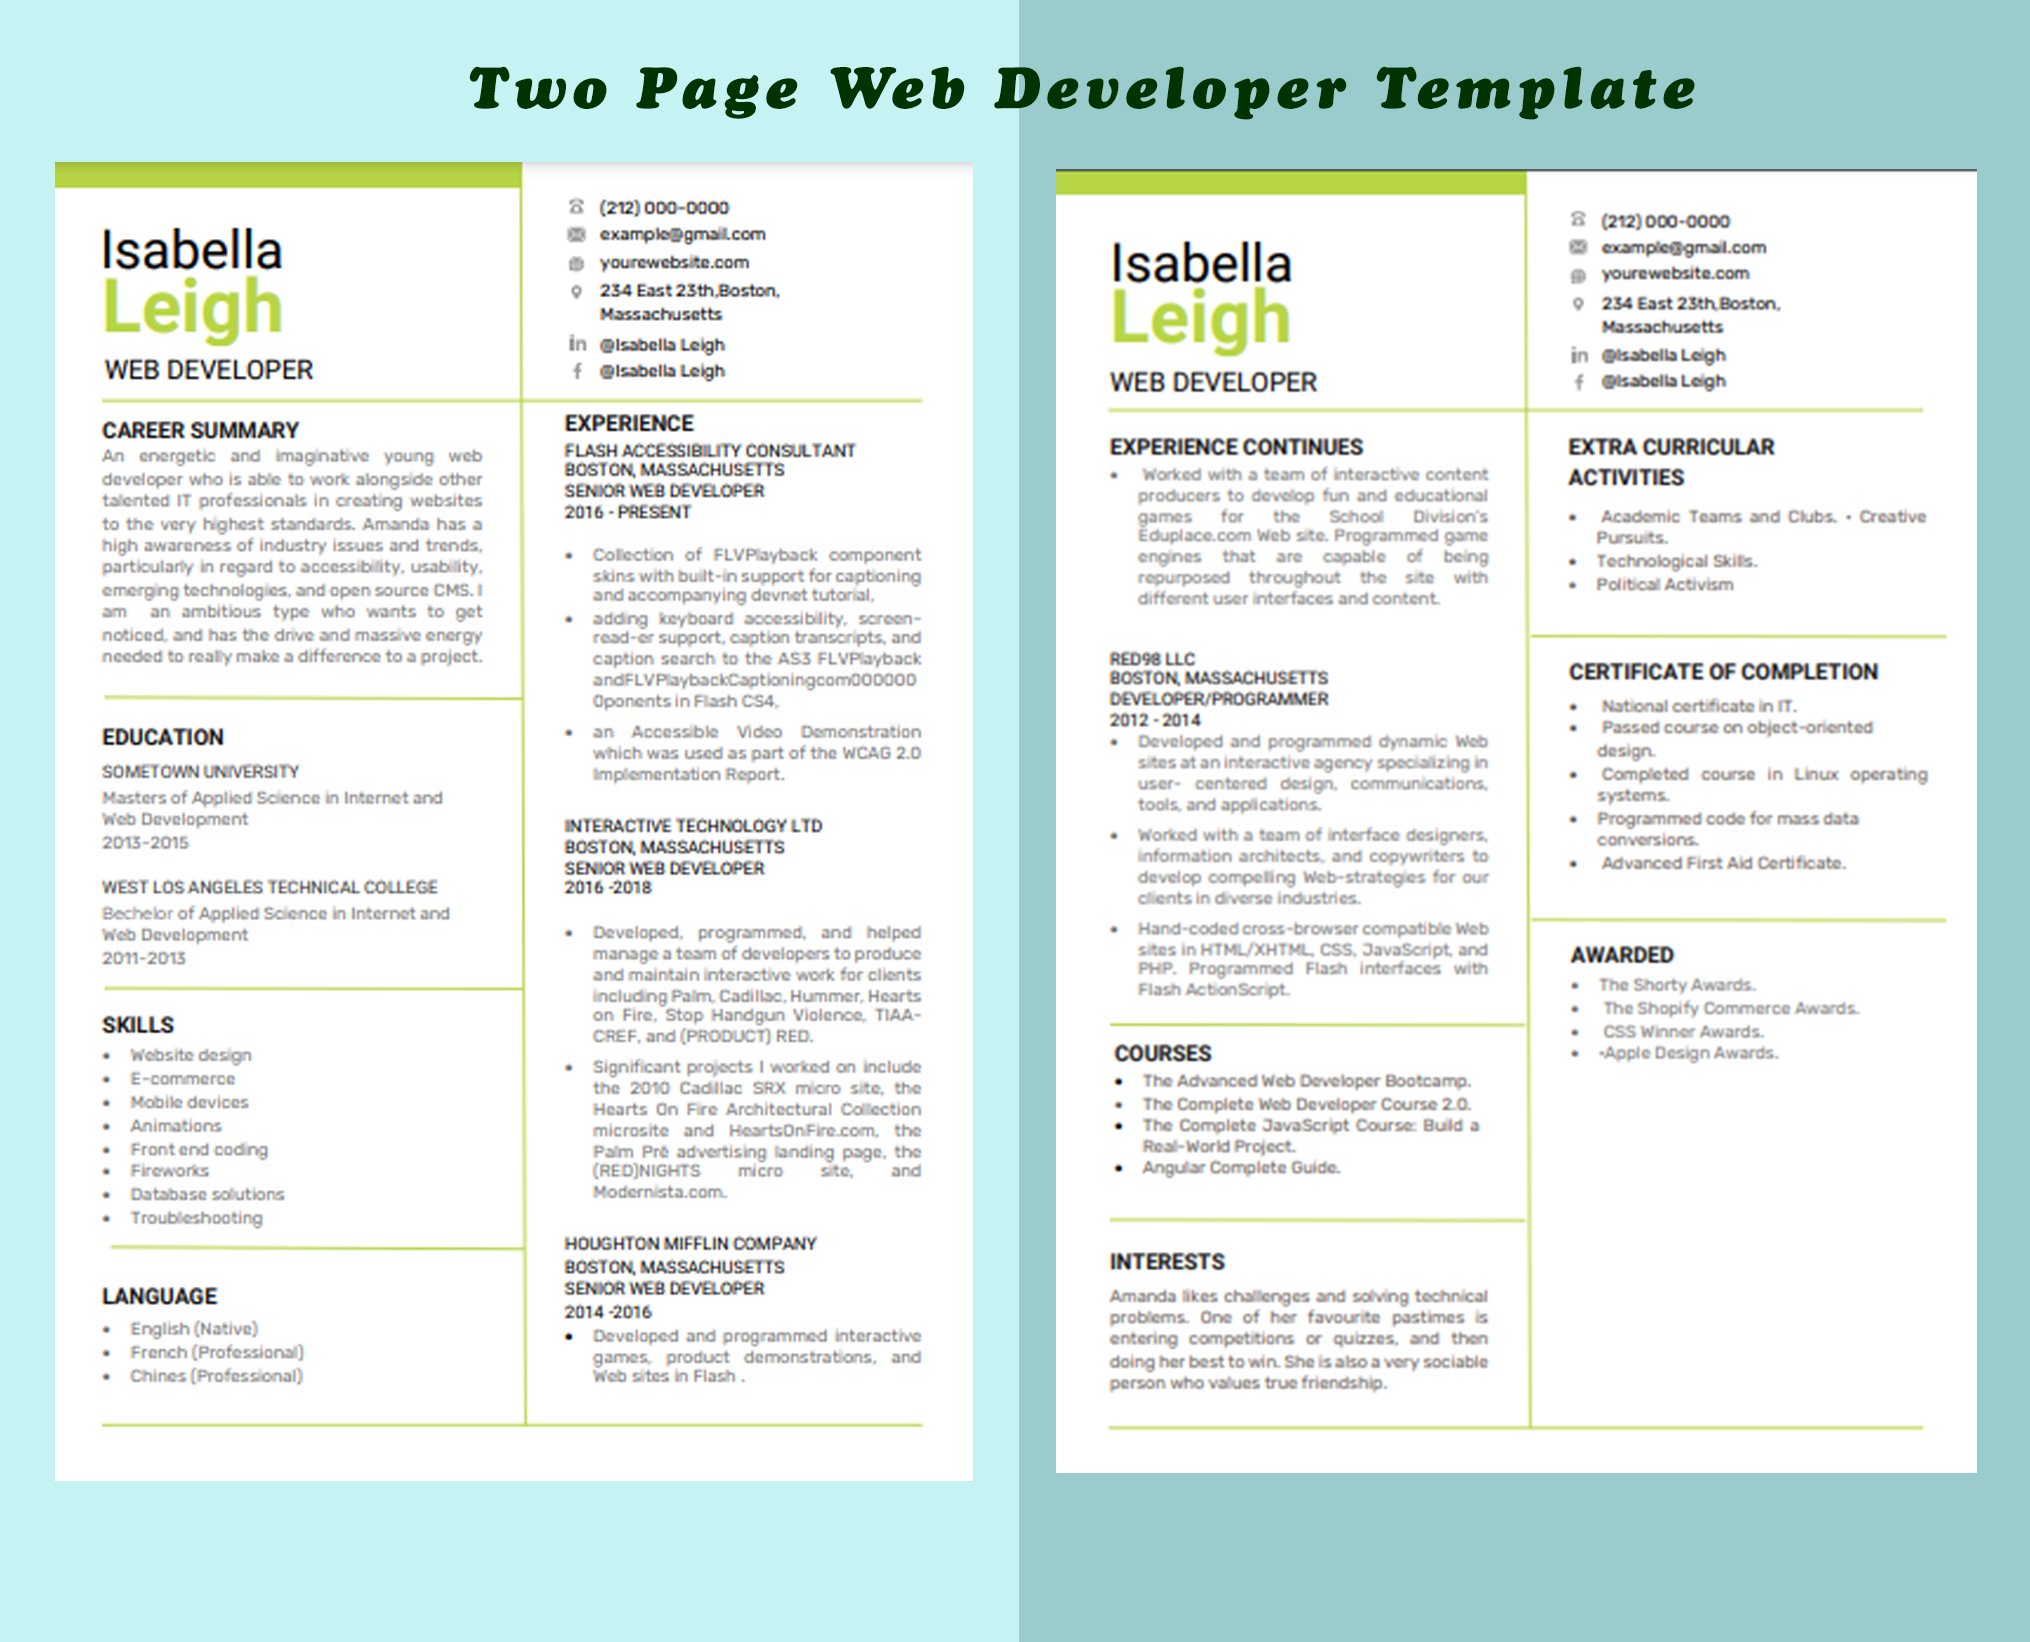 Two page web development template.